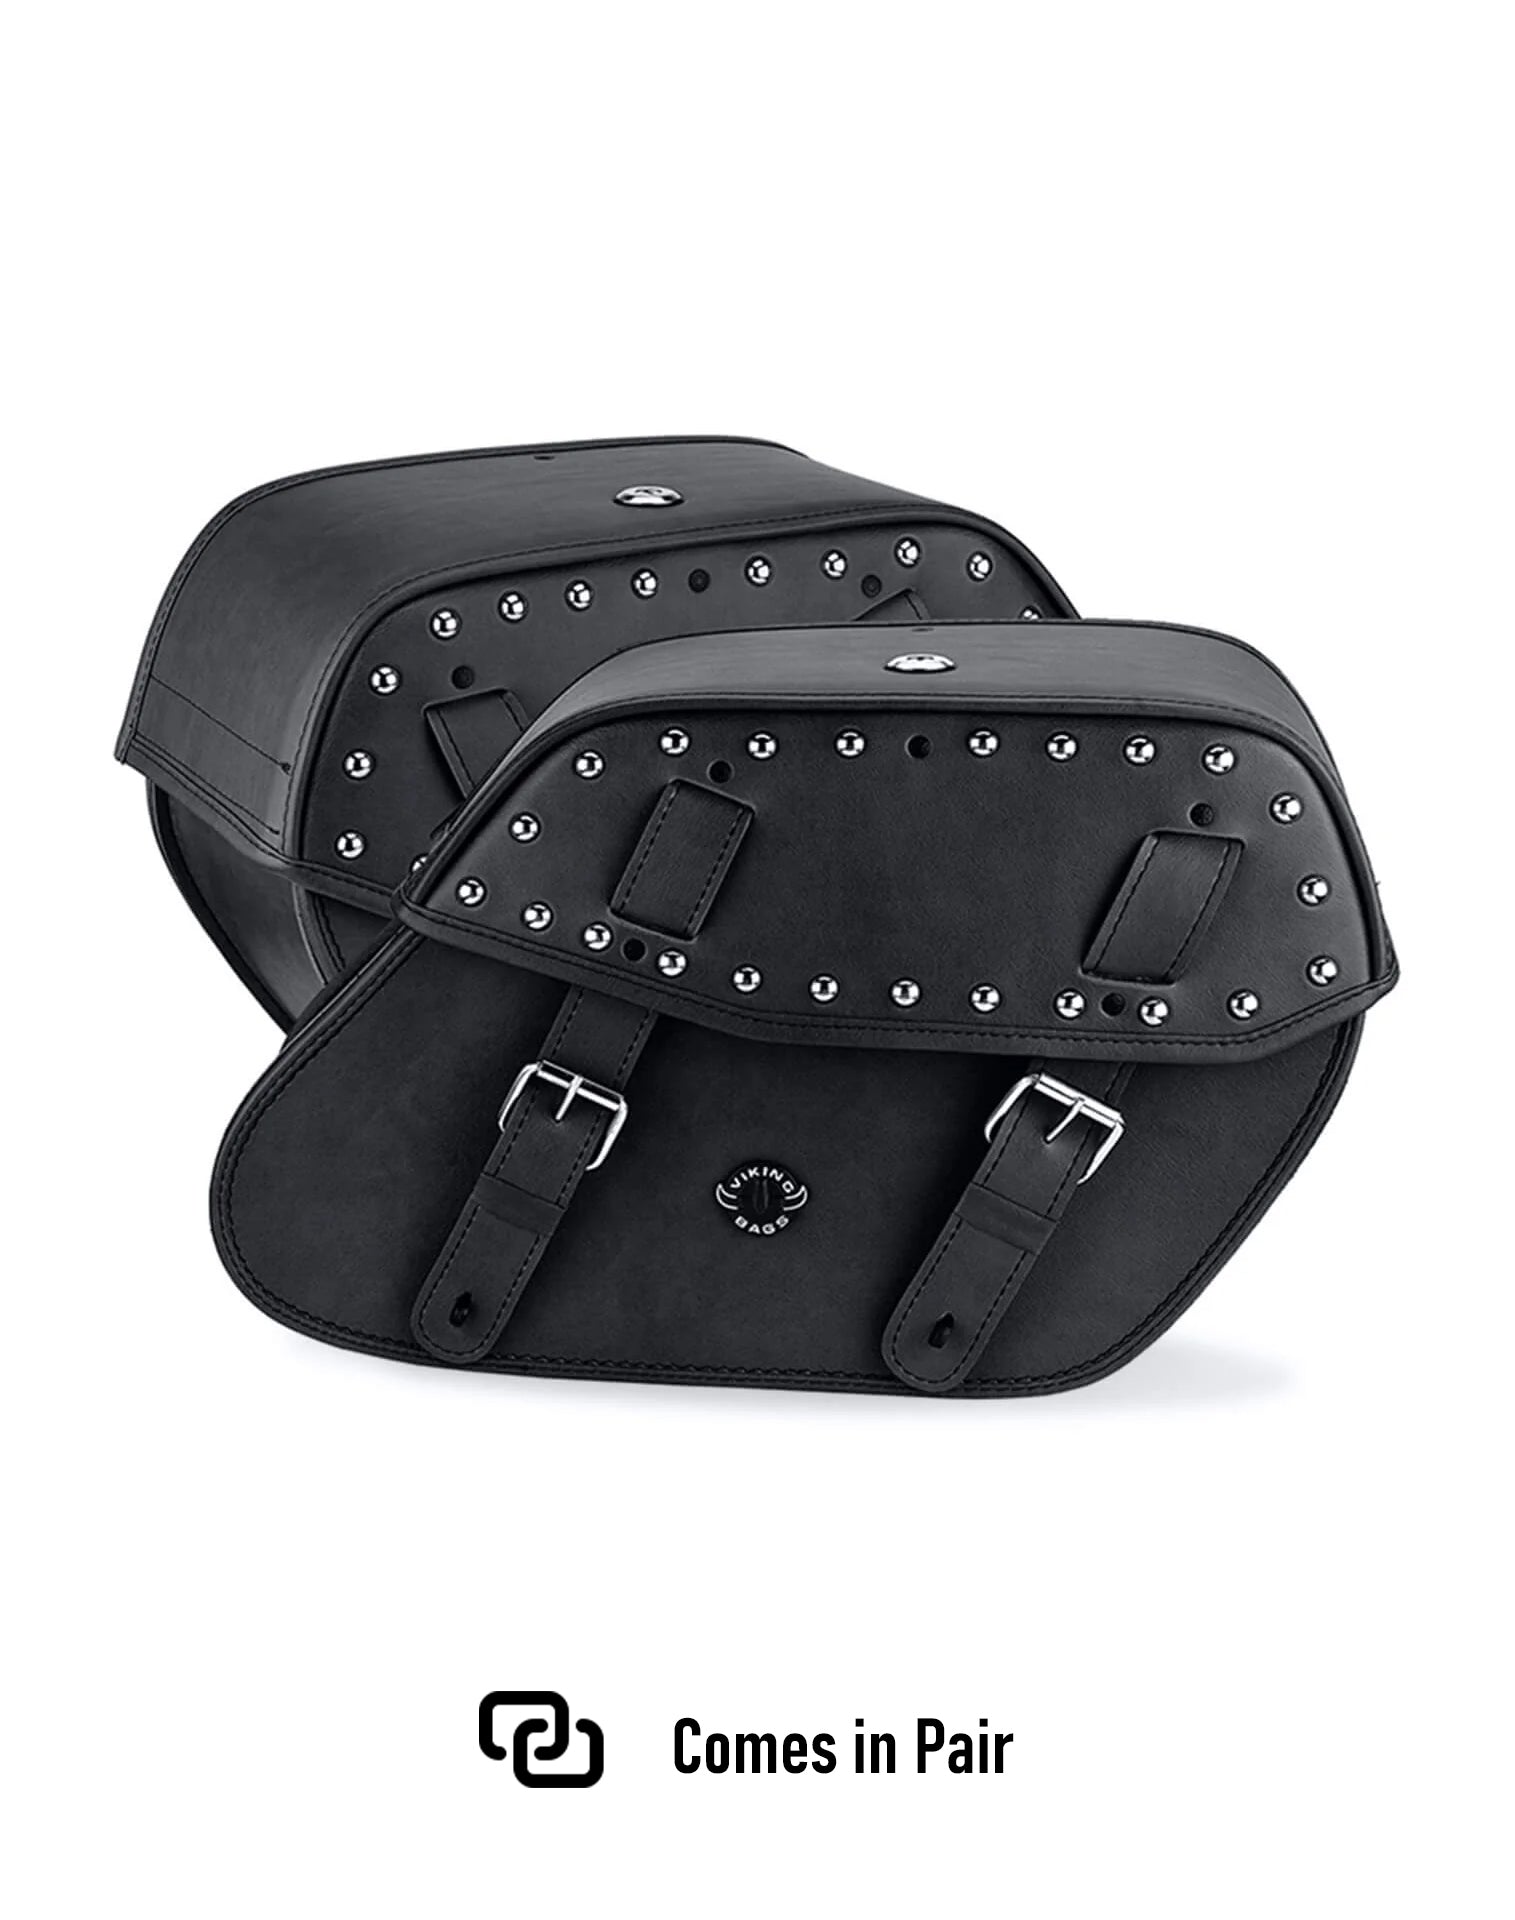 Viking Odin Large Triumph Rocket Iii Classic Studded Leather Motorcycle Saddlebags Weather Resistant Bags Comes in Pair